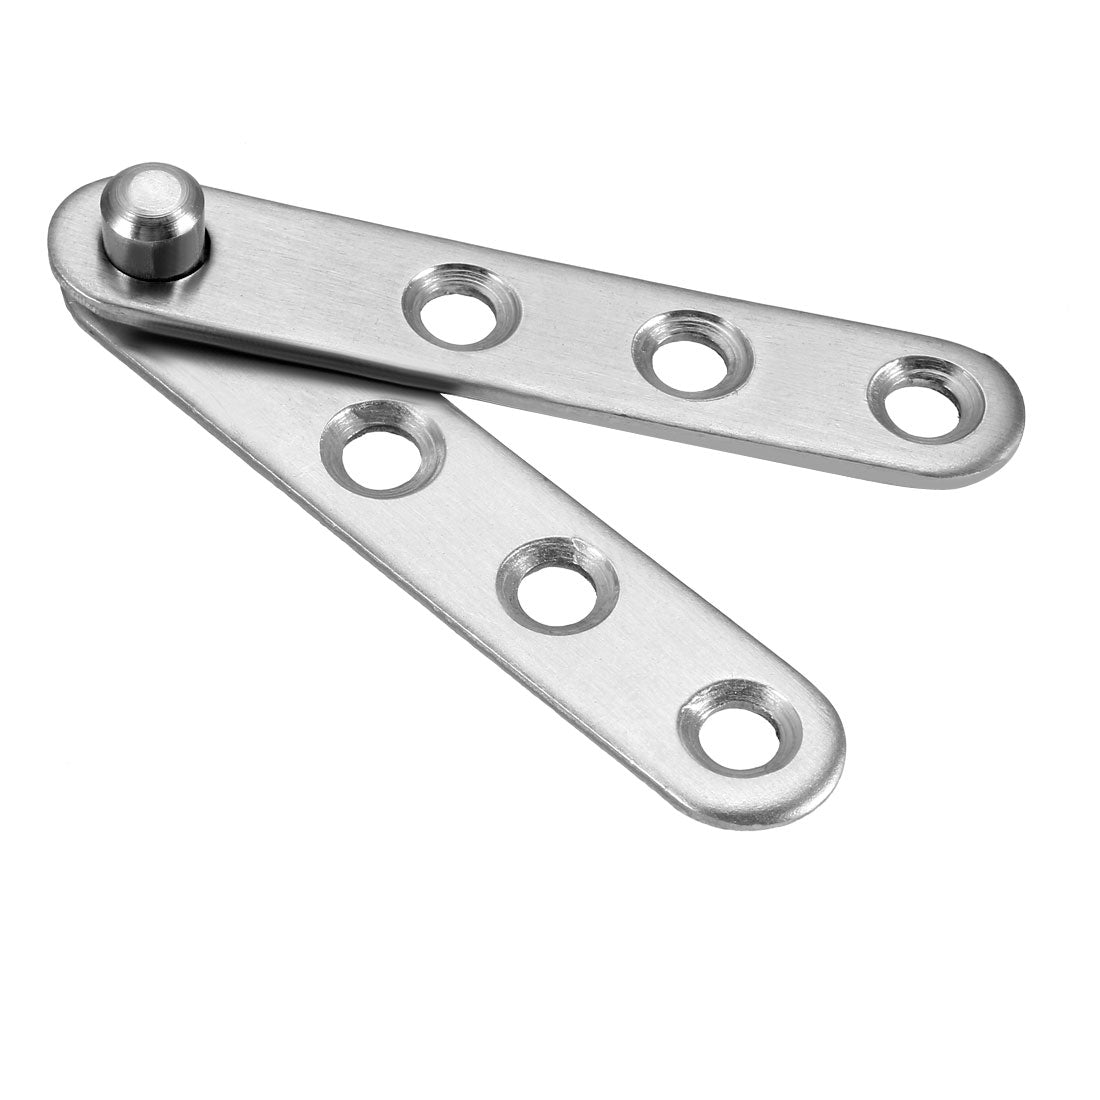 uxcell Uxcell Door Pivot Hinge, 58mm x 11mm x 9mm Stainless Steel 360 Degree Rotating 8pcs